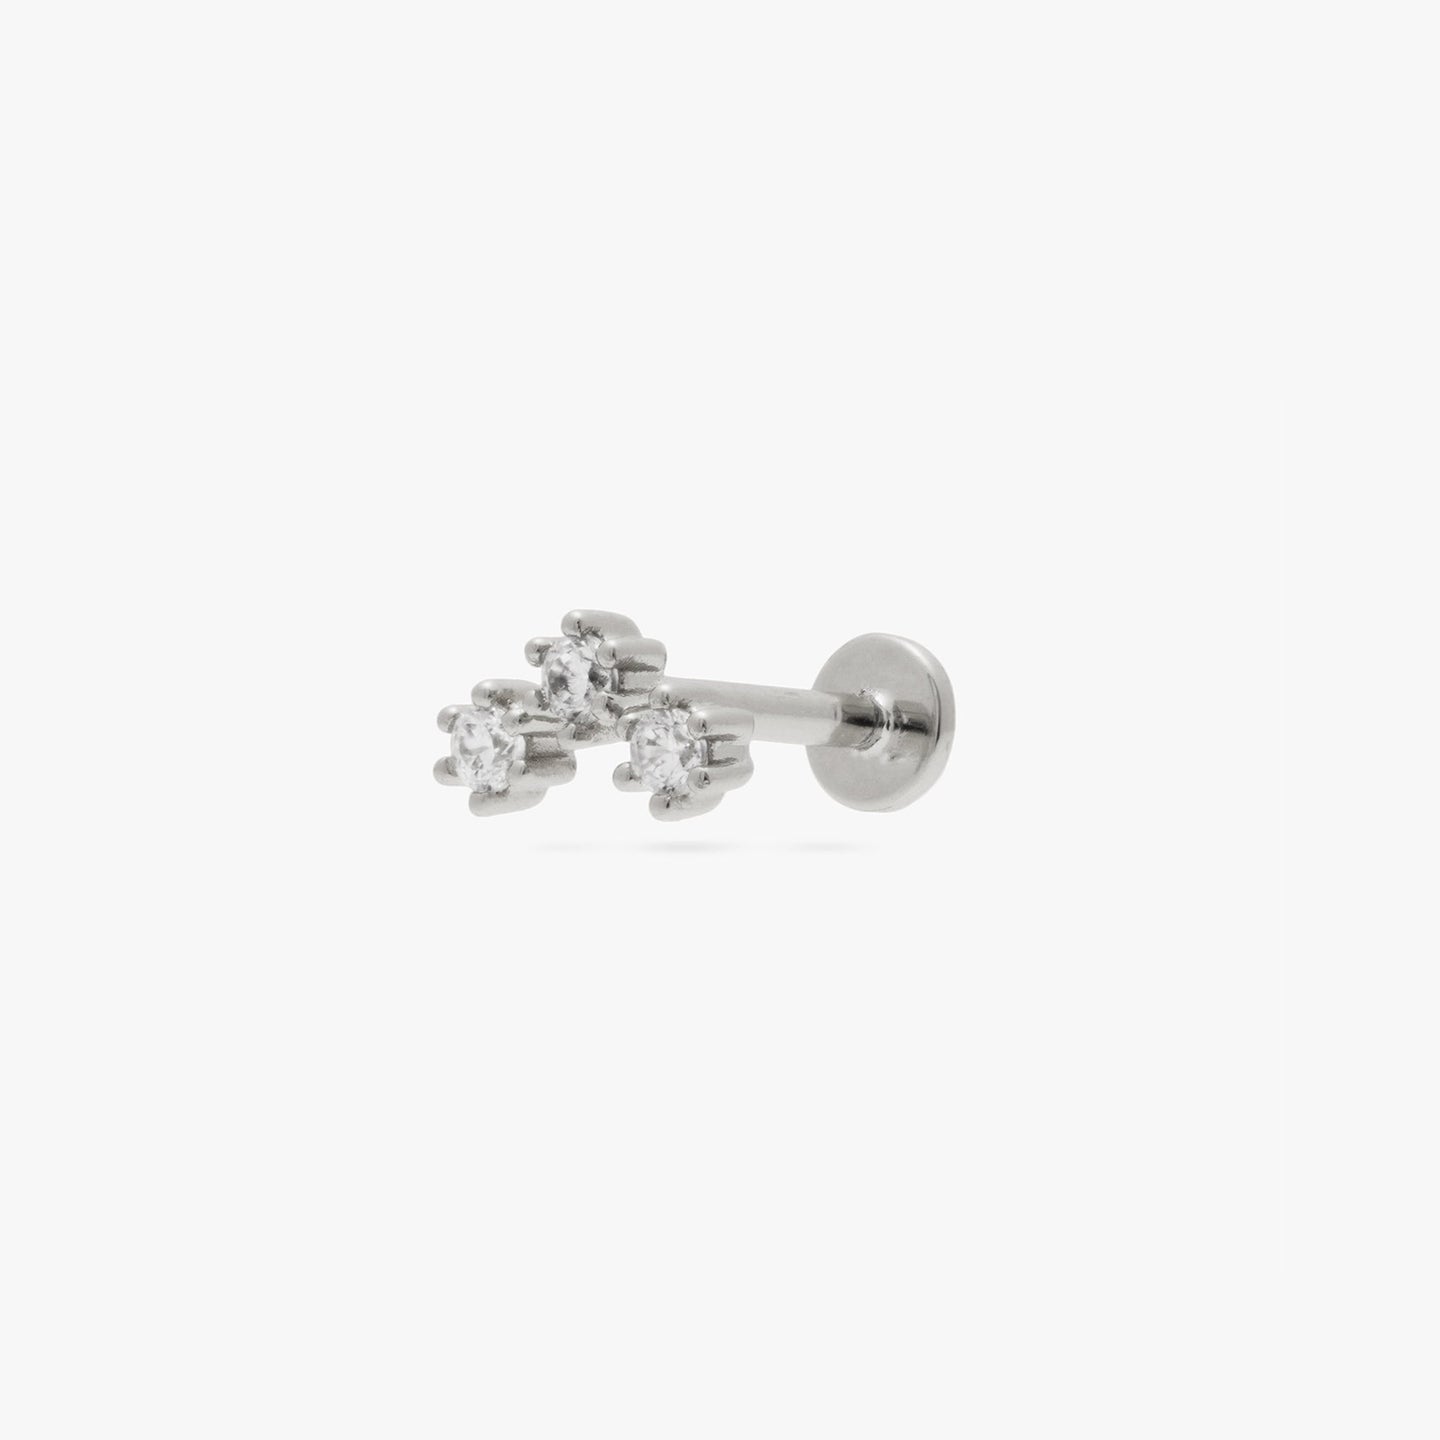 A silver cluster shaped stud with clear czs and a flatback post color:null|silver/clear